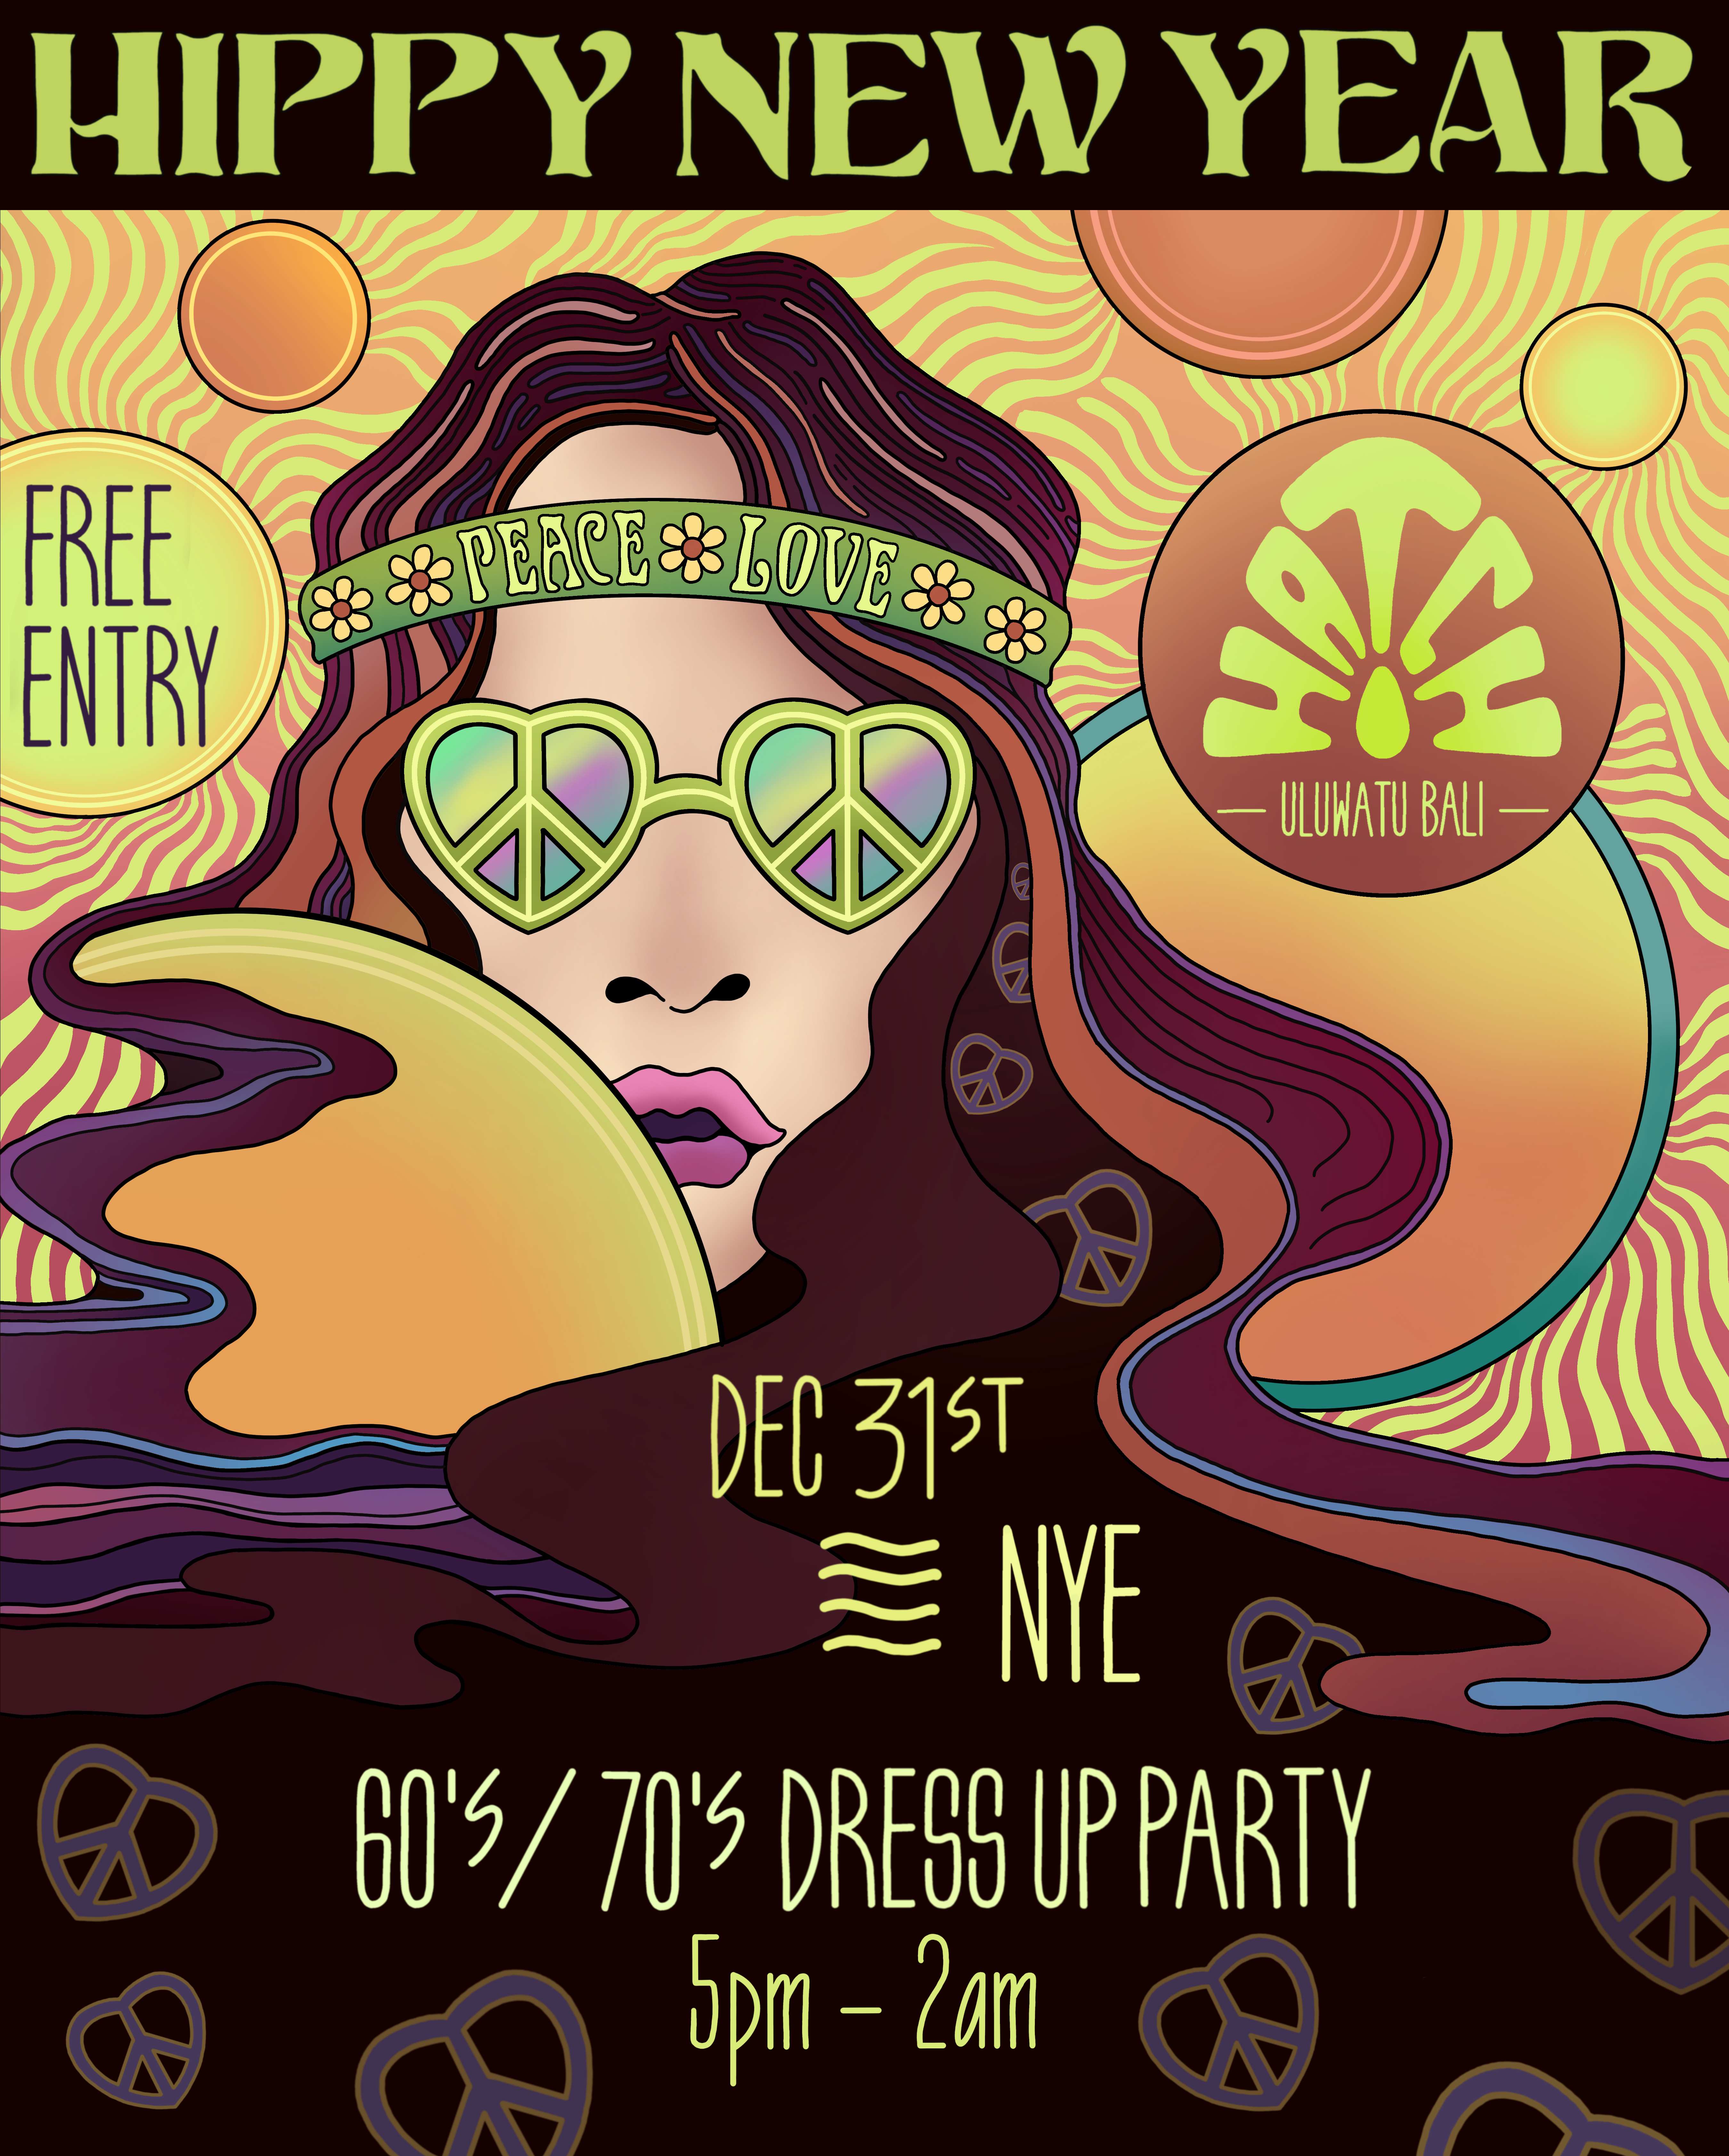 HIPPY NEW YEAR AT HATCH – SATURDAY DECEMBER 31ST thumbnail image